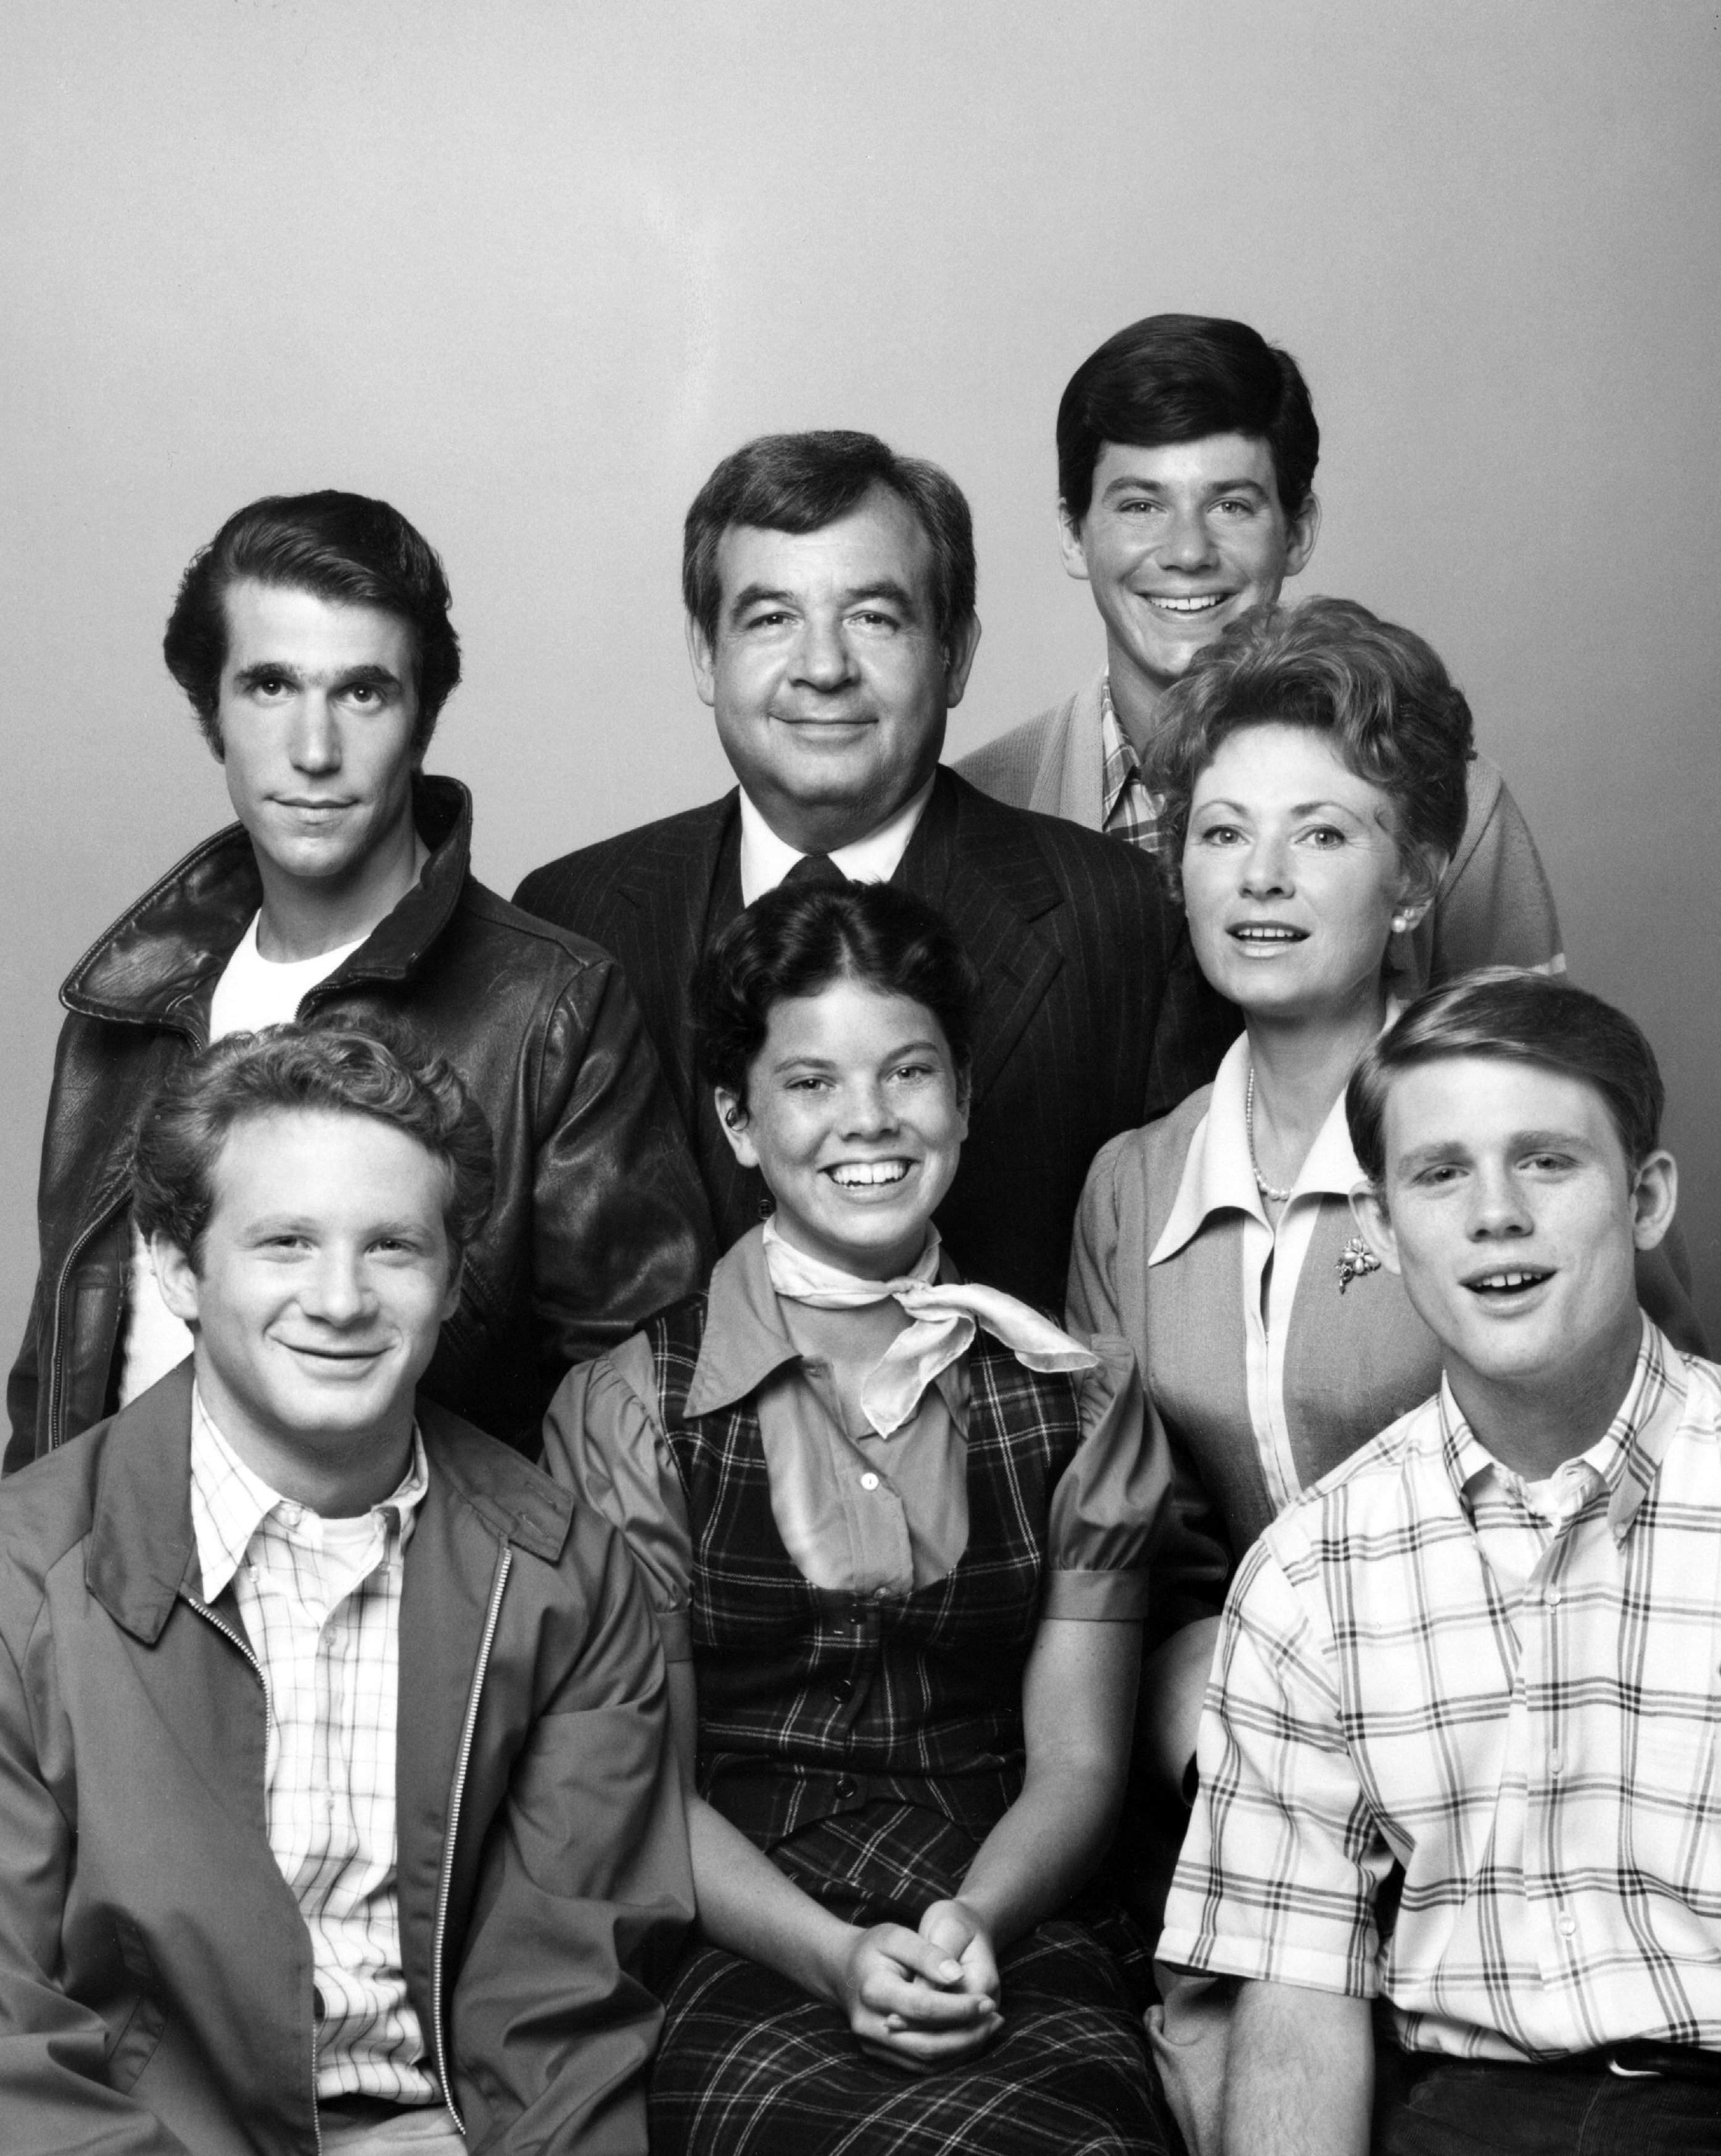 Henry Winkler, Tom Bosley, Anson Williams, Marion Ross, Donny Most, Erin Moran, Ron Howard on "Happy Days" Season three, July 1975 | Source: Getty Images